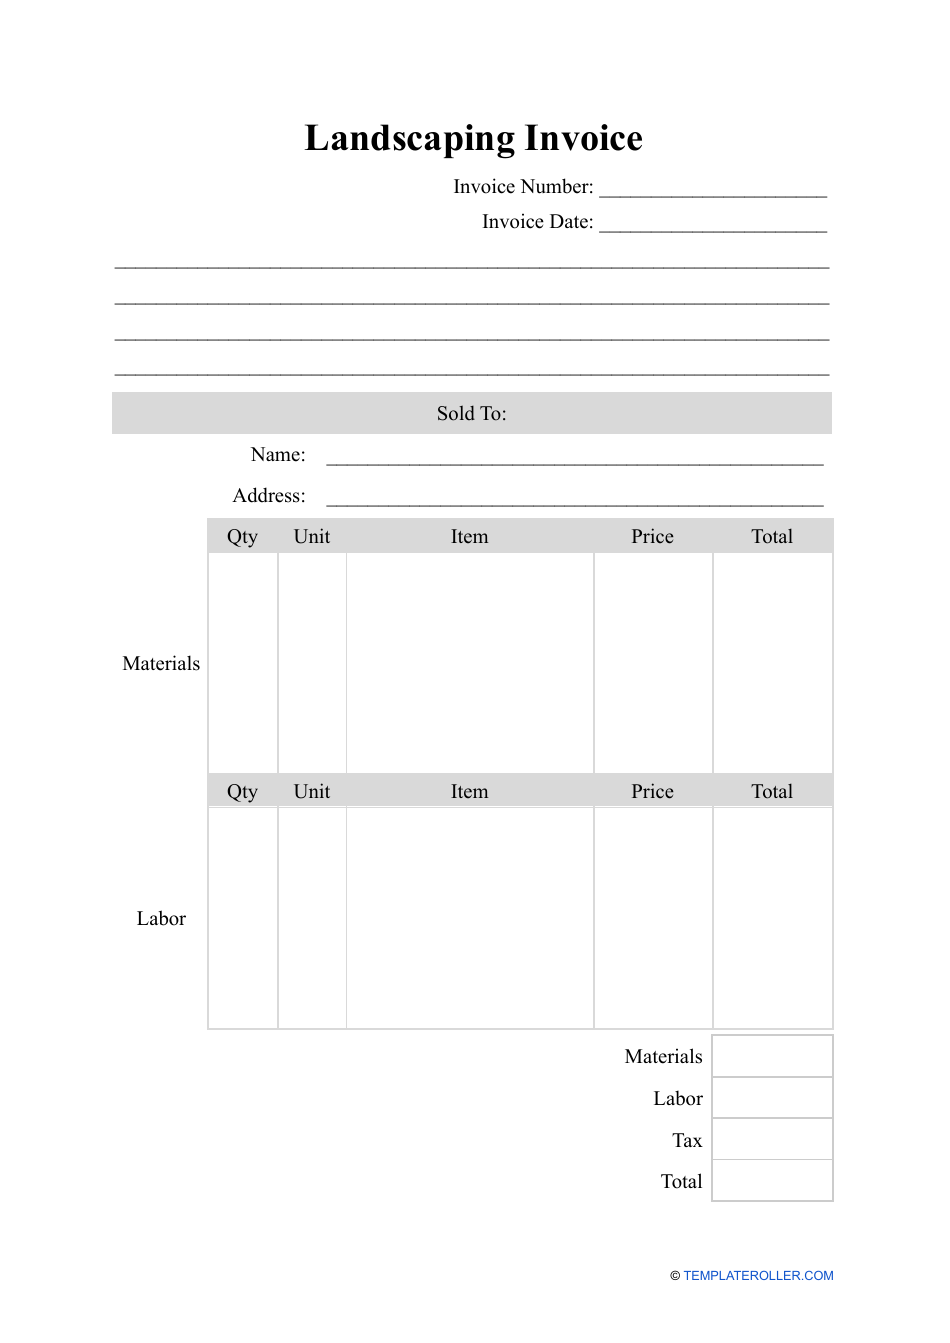 landscaping invoice template download printable pdf